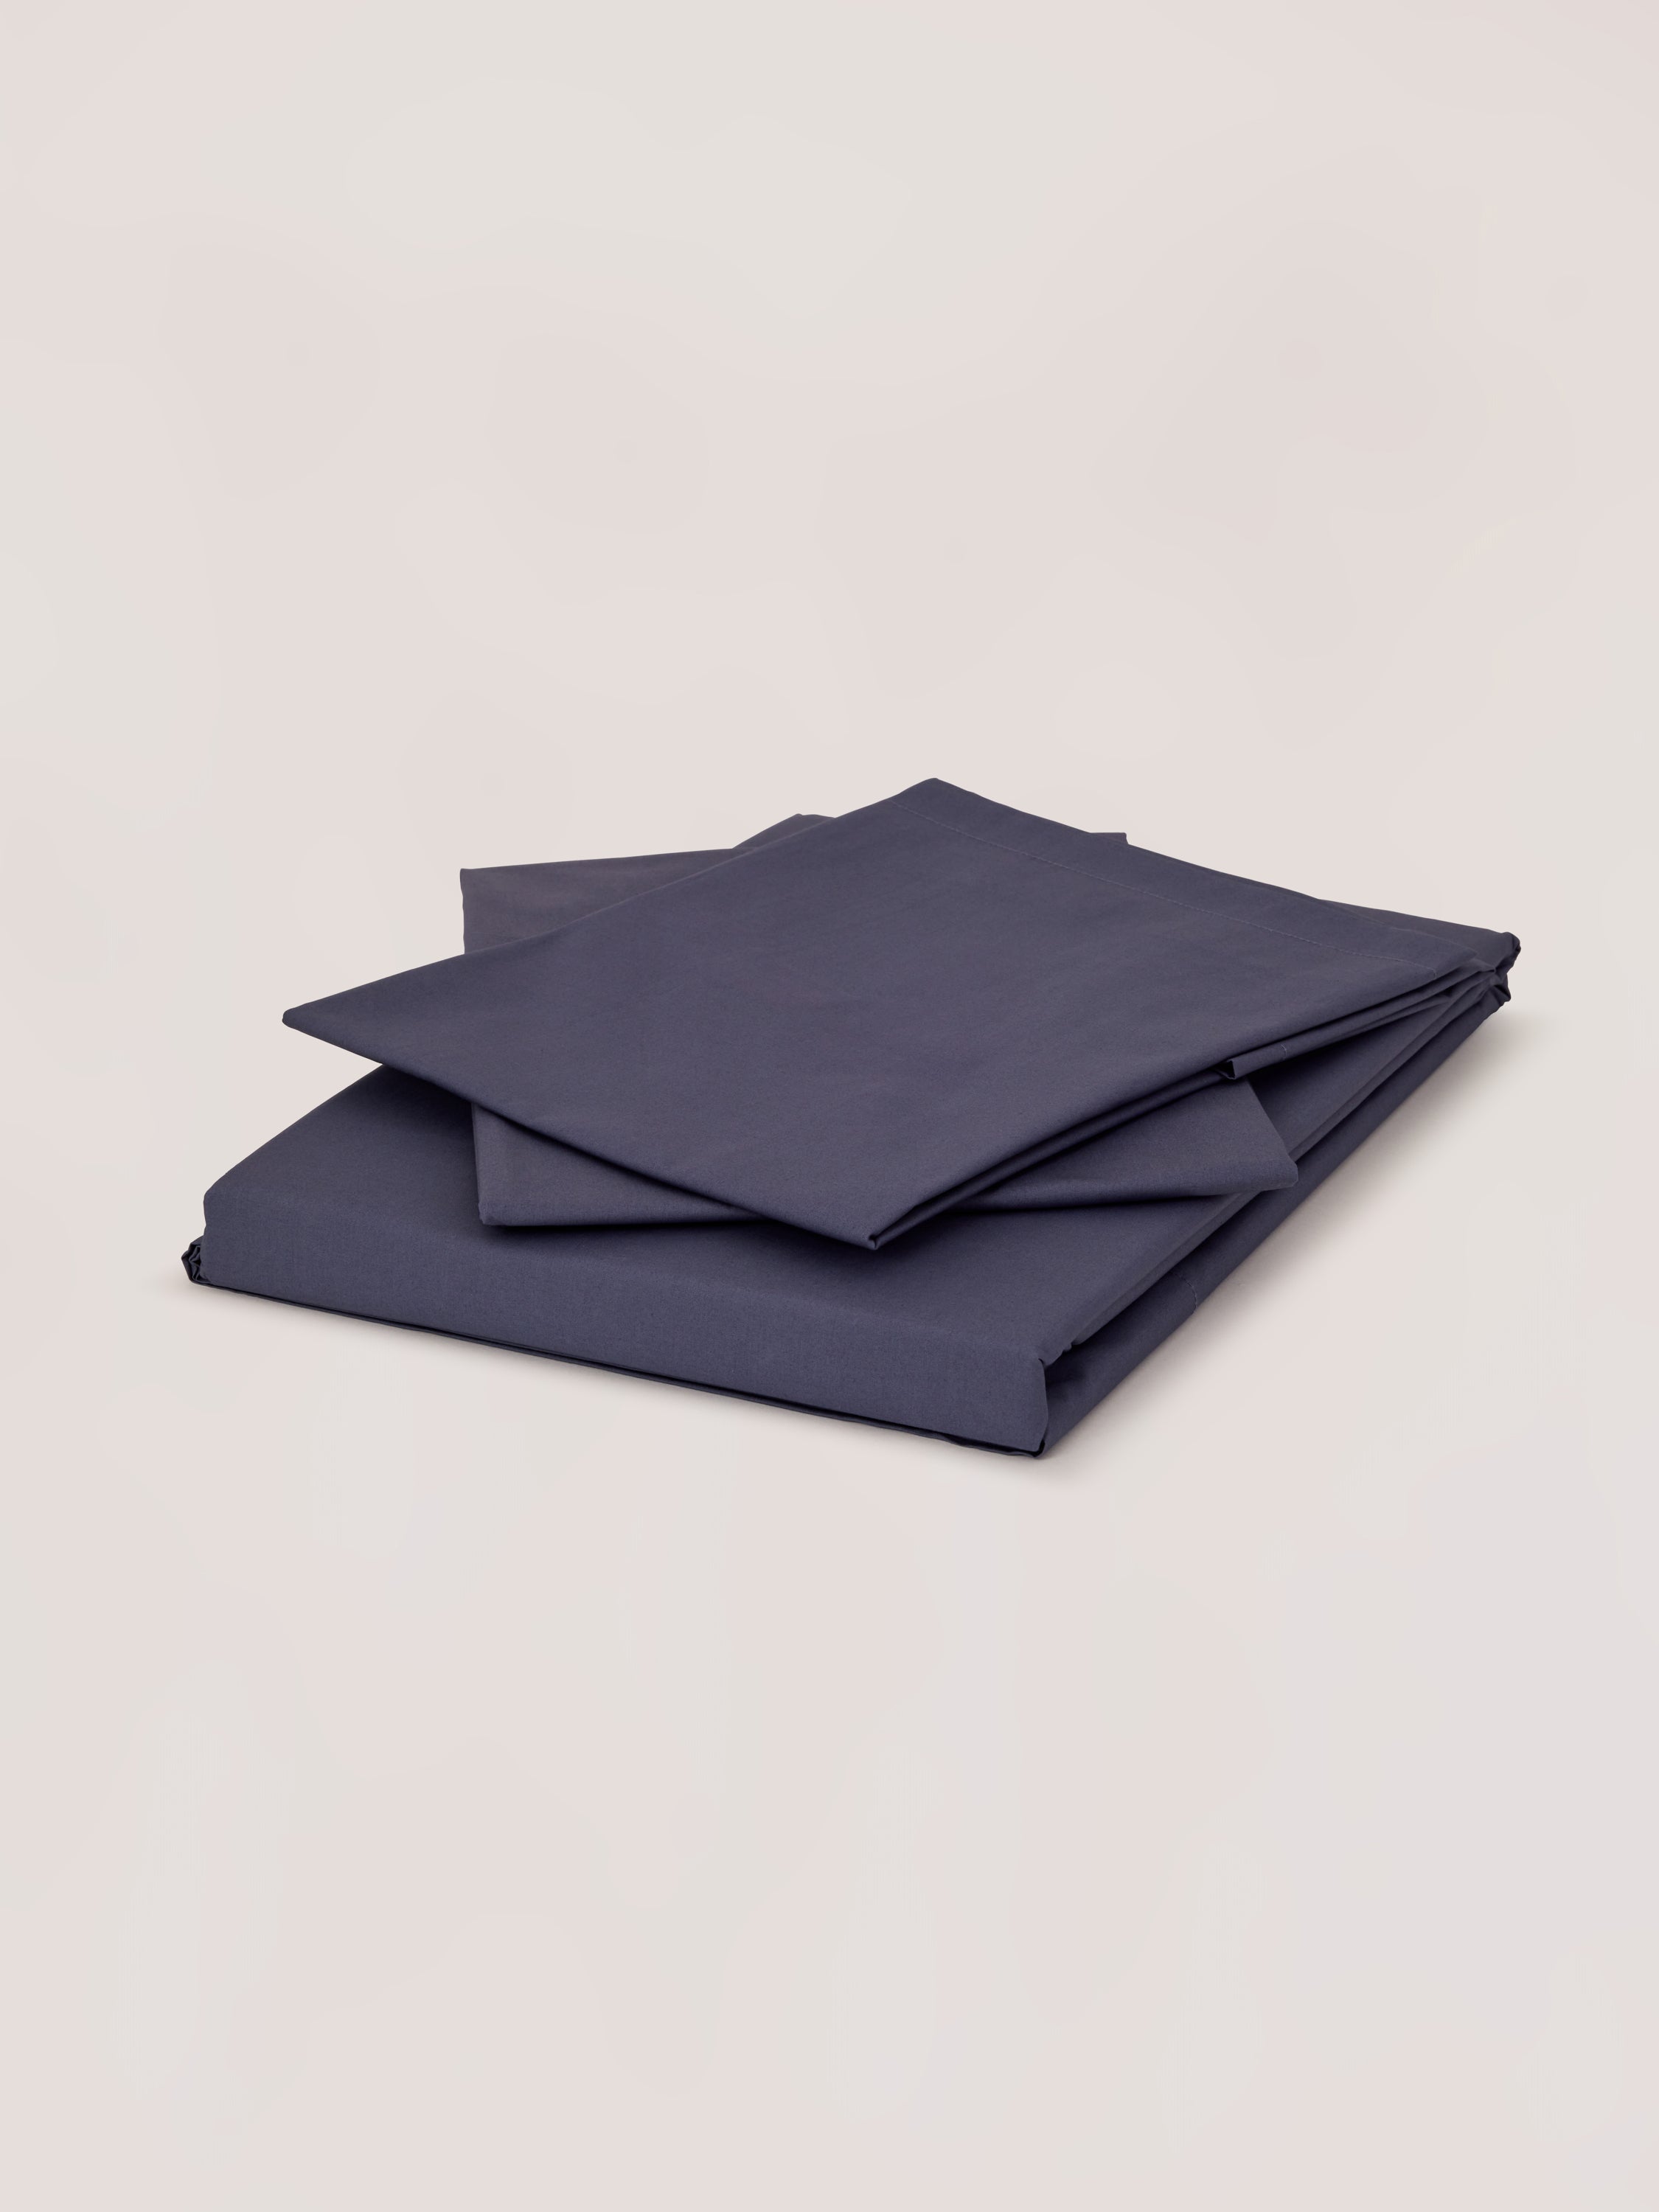 100% Organic Cotton Percale Flat Sheet and pillow cases